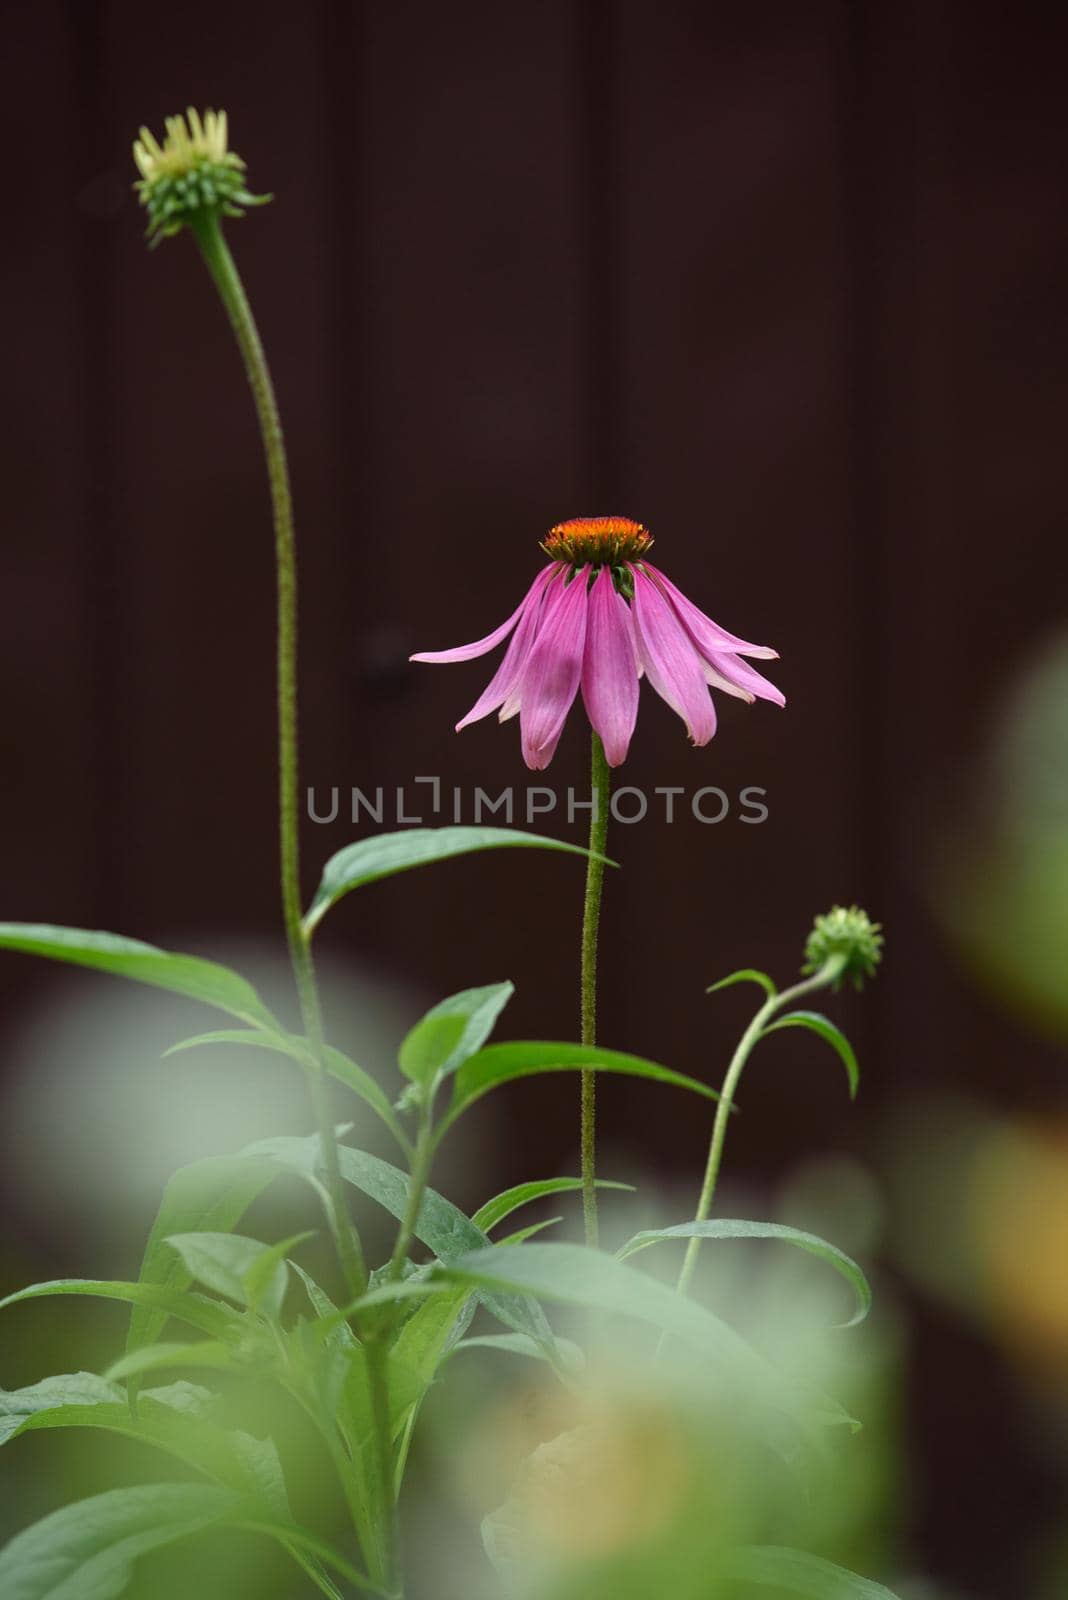 A close-up of an echinacea flower on a flower bed  by oracal